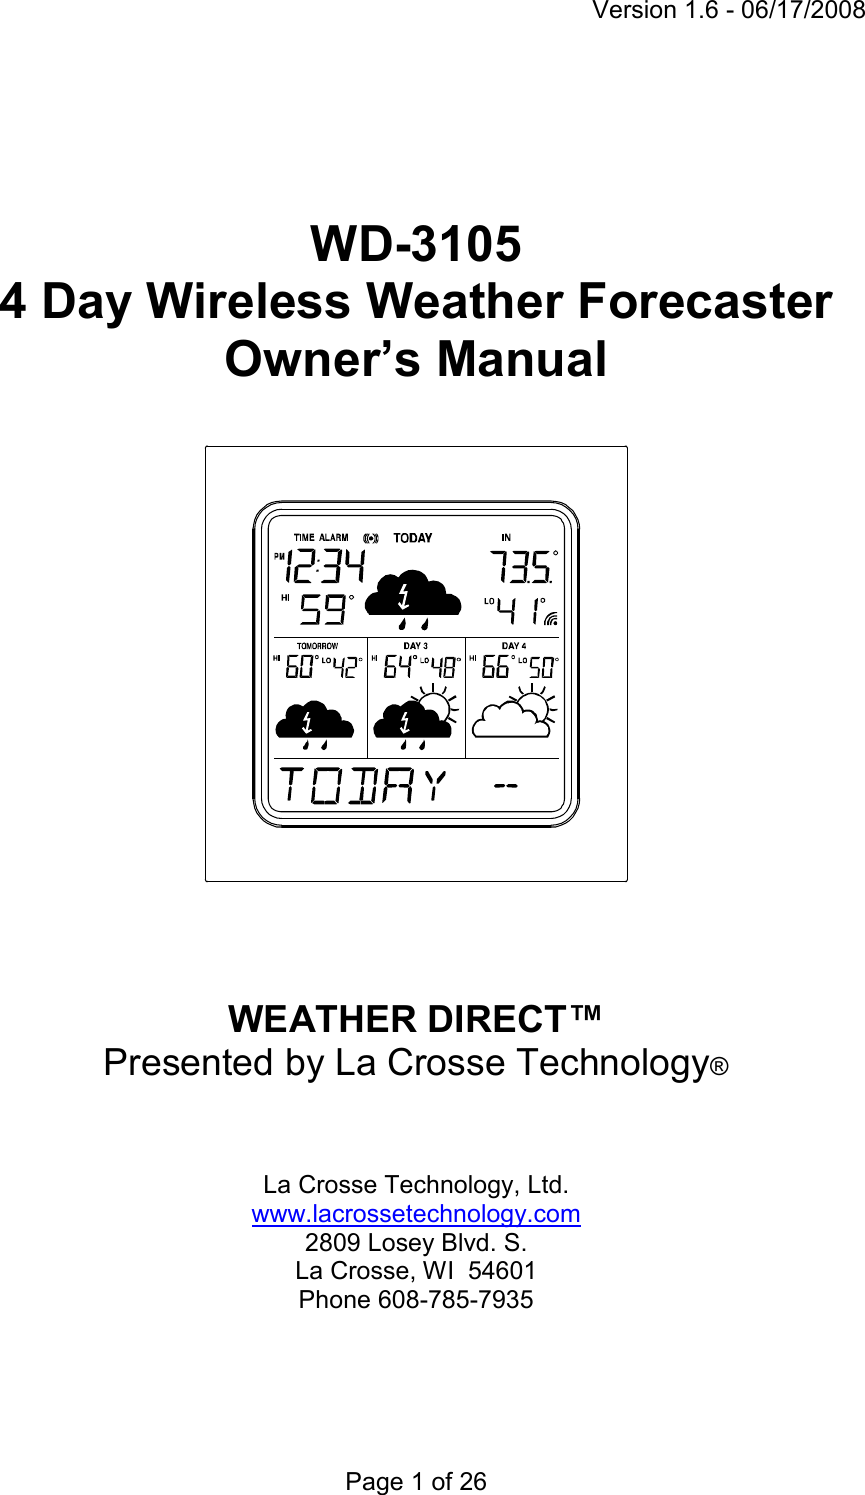 Version 1.6 - 06/17/2008 Page 1 of 26      WD-3105  4 Day Wireless Weather Forecaster Owner’s Manual     WEATHER DIRECT™ Presented by La Crosse Technology®     La Crosse Technology, Ltd. www.lacrossetechnology.com 2809 Losey Blvd. S. La Crosse, WI  54601 Phone 608-785-7935 